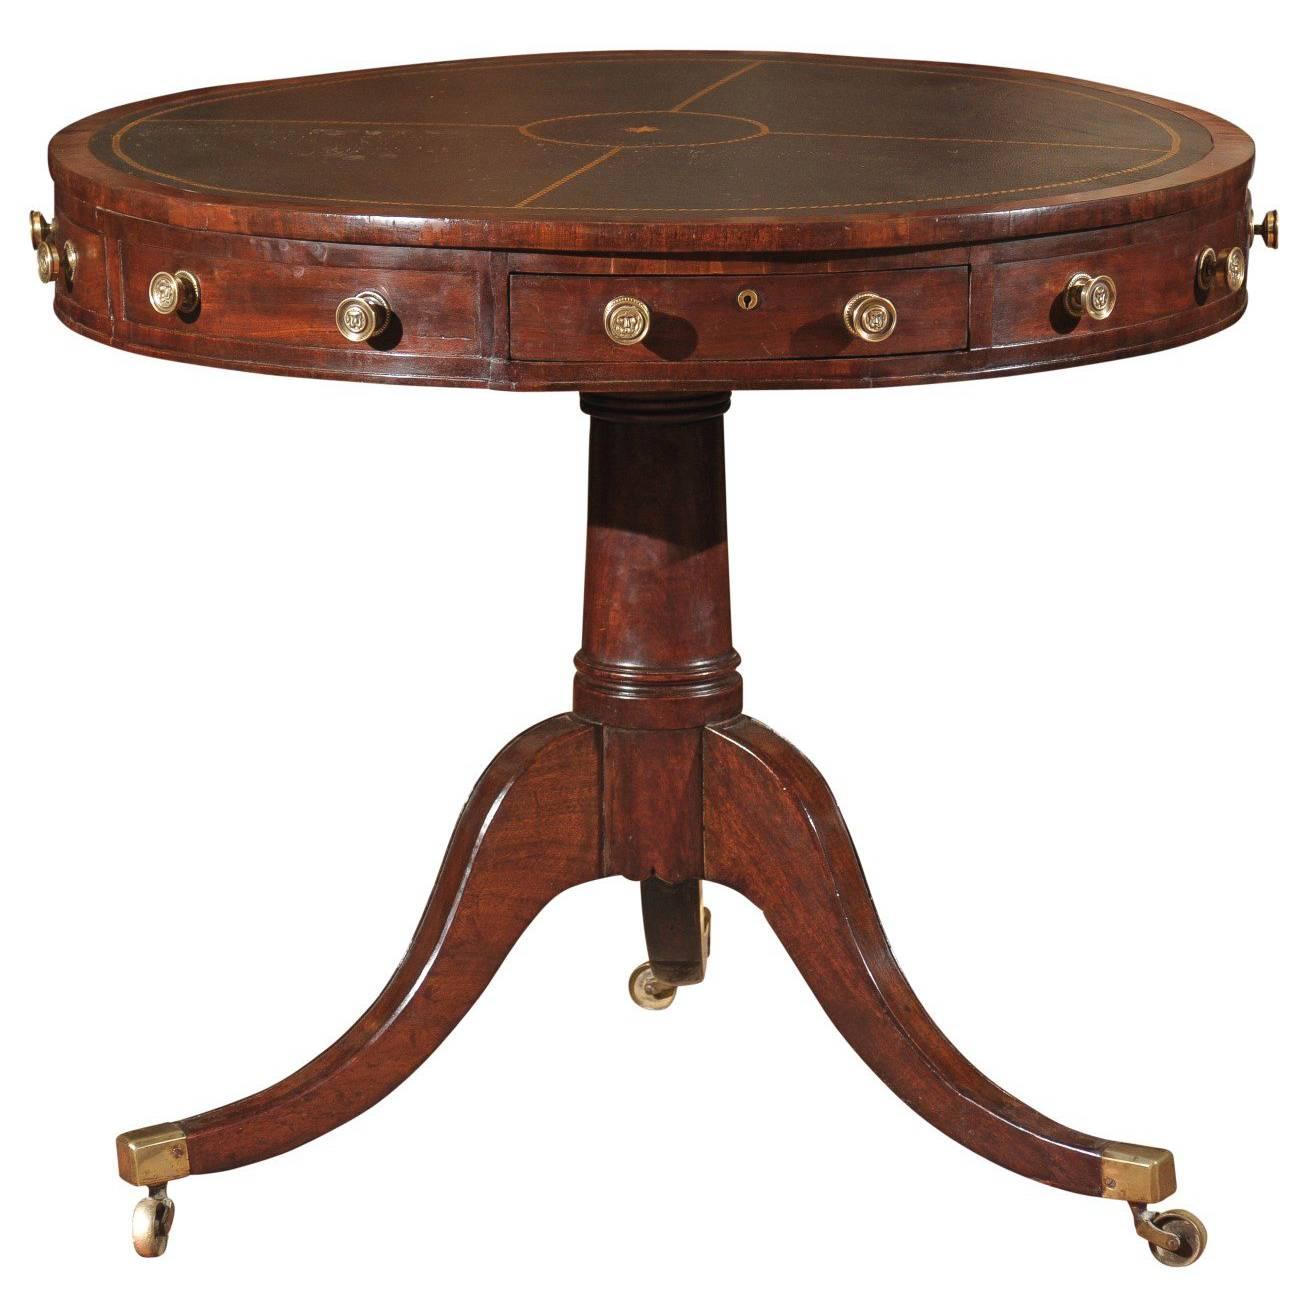 19th Century English Mahogany Drum Table with Leather Top and Pedestal Base